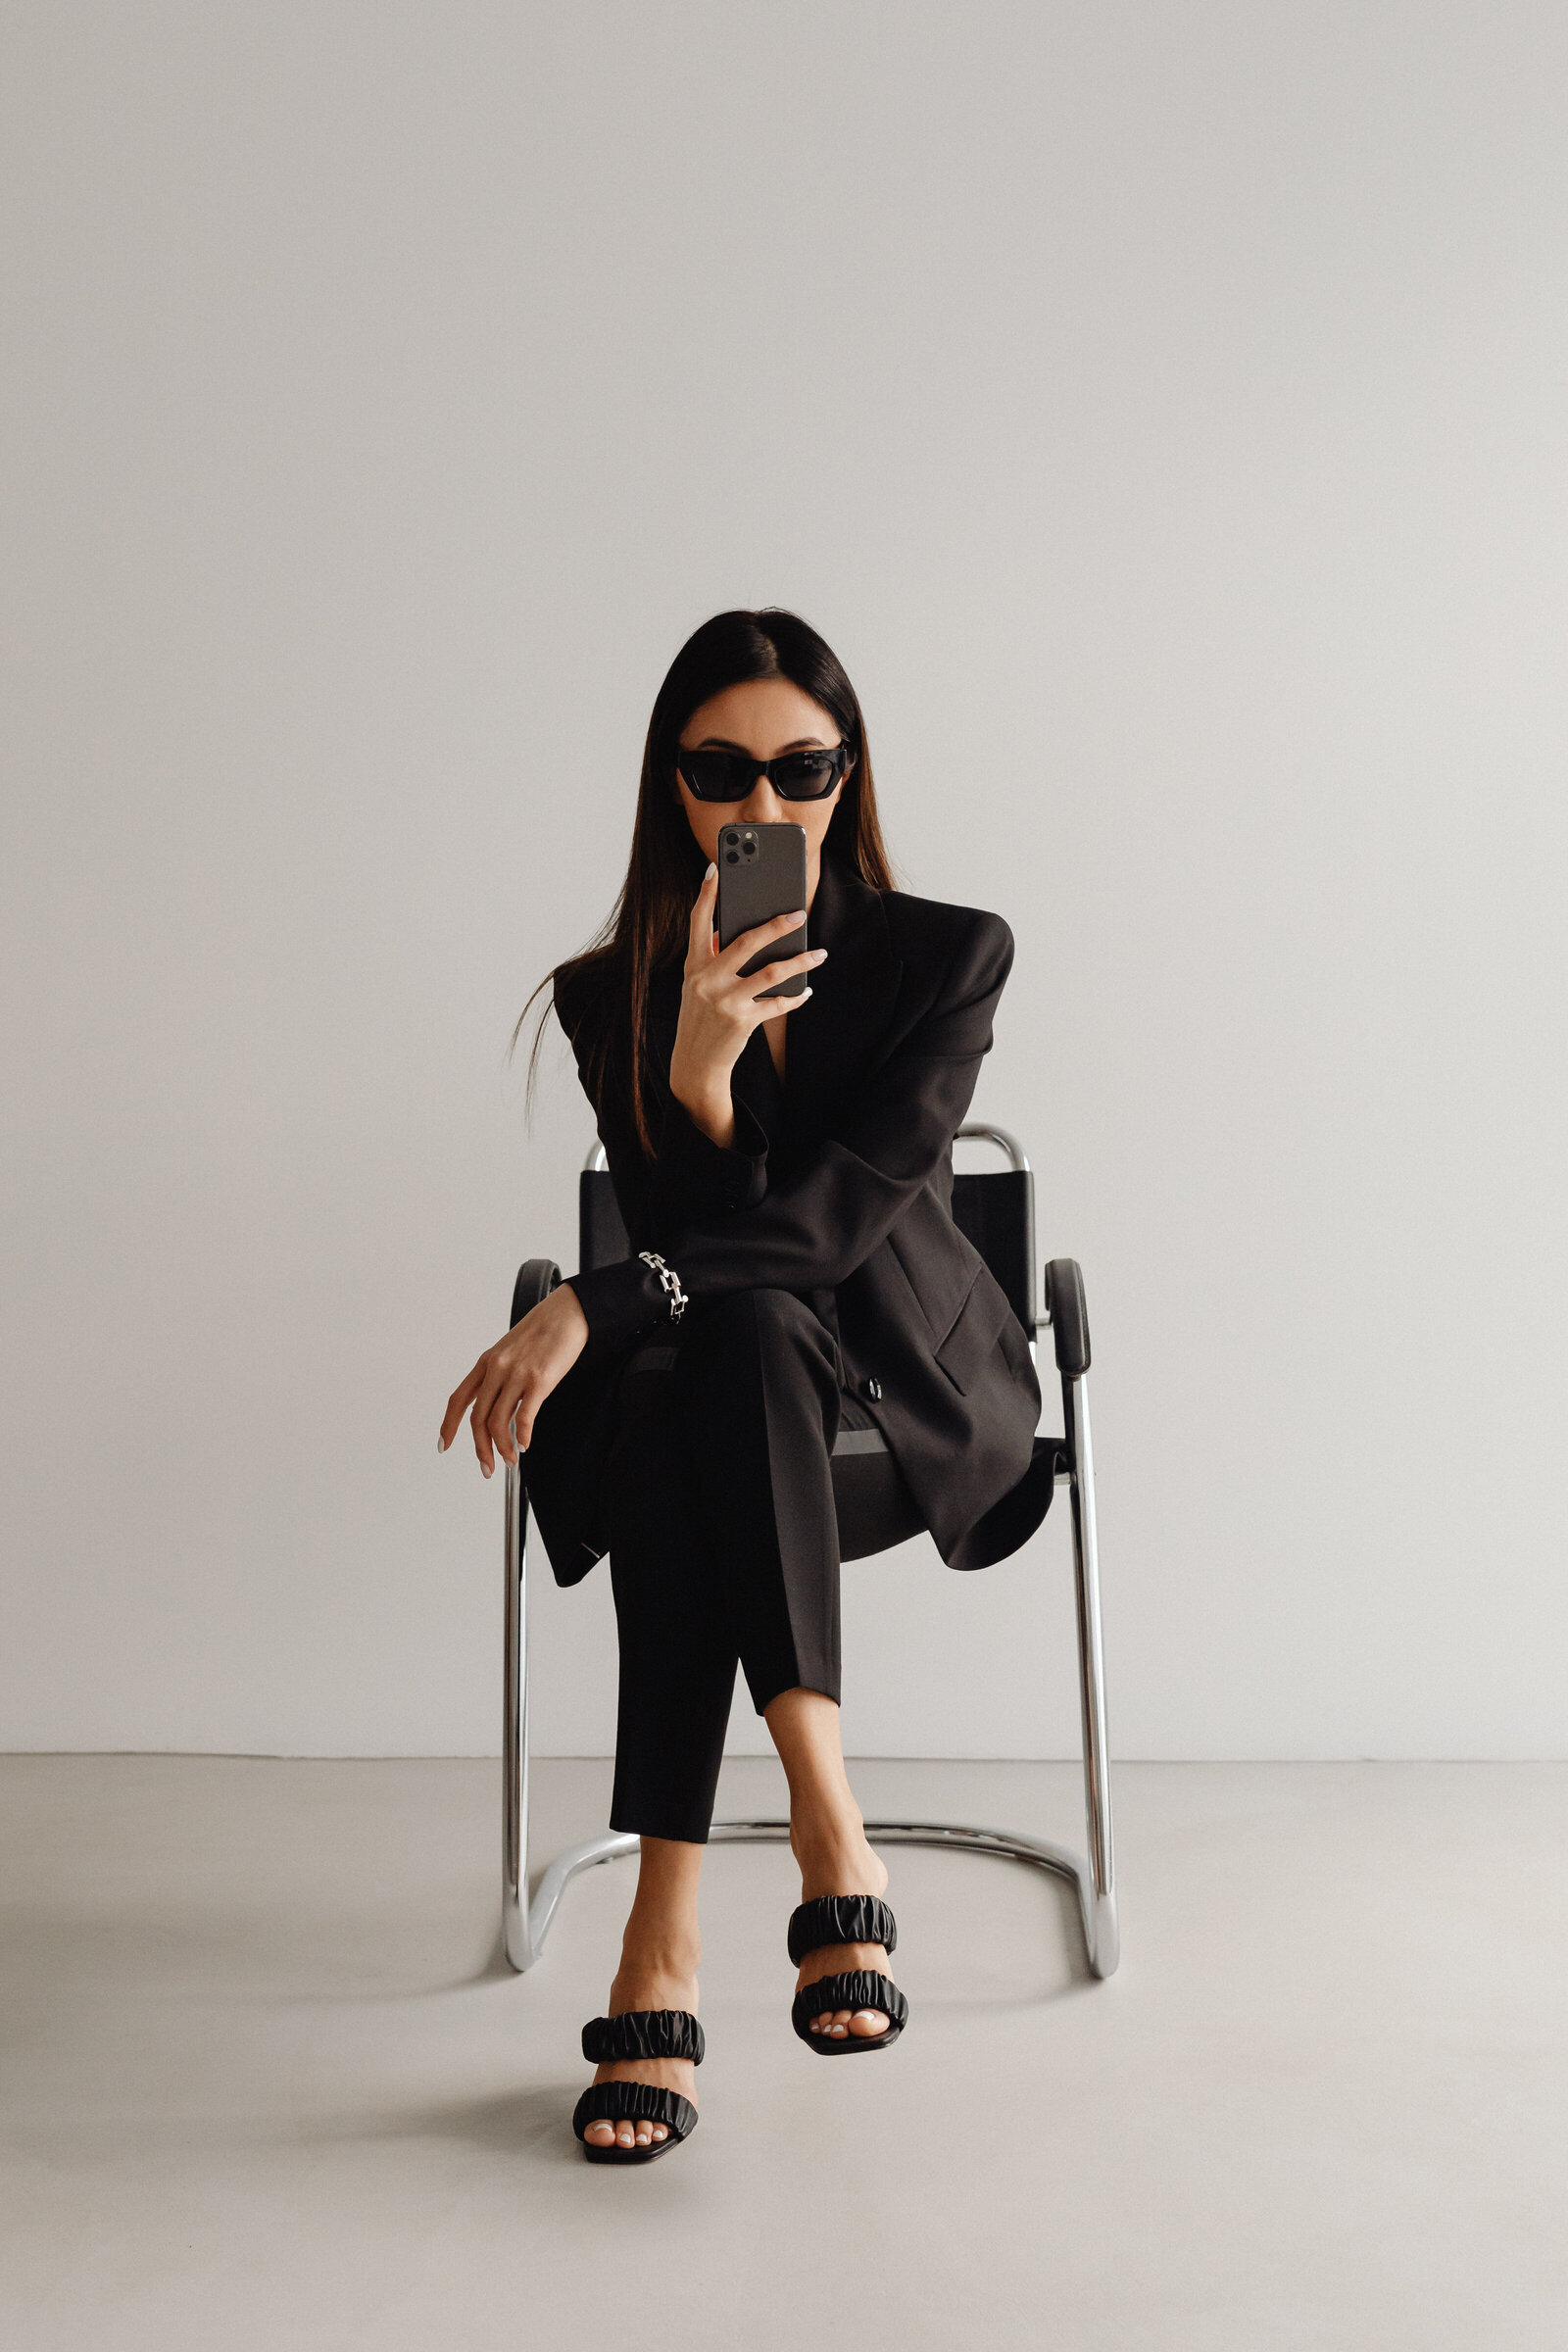 kaboompics_dark-classy-aesthetic-fashion-beautiful-asian-female-entrepreneur-in-black-suit-technology-and-devices-iphone-laptop-airpods-30037